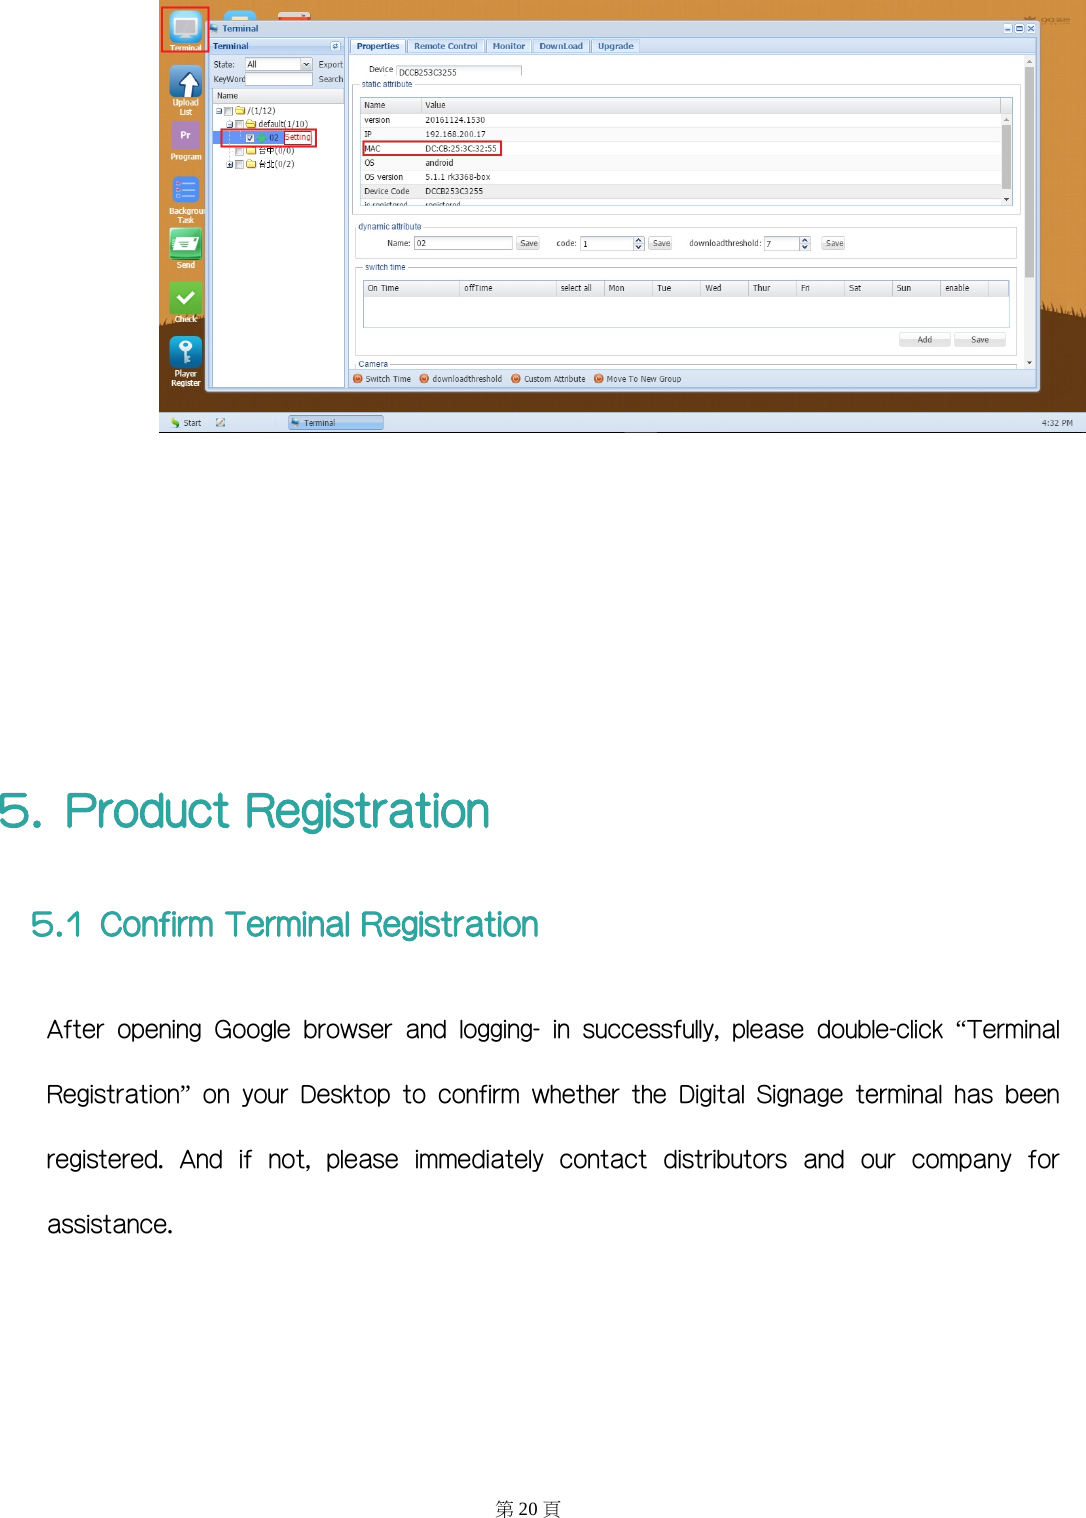        5. Product Registration 5.1 Confirm Terminal Registration After  opening  Google  browser  and  logging-  in  successfully,  please  double-click  “Terminal Registration”  on  your  Desktop  to  confirm  whether  the  Digital  Signage  terminal  has  been  registered.  And  if  not,  please  immediately  contact  distributors  and  our  company  for assistance. 第20 頁 